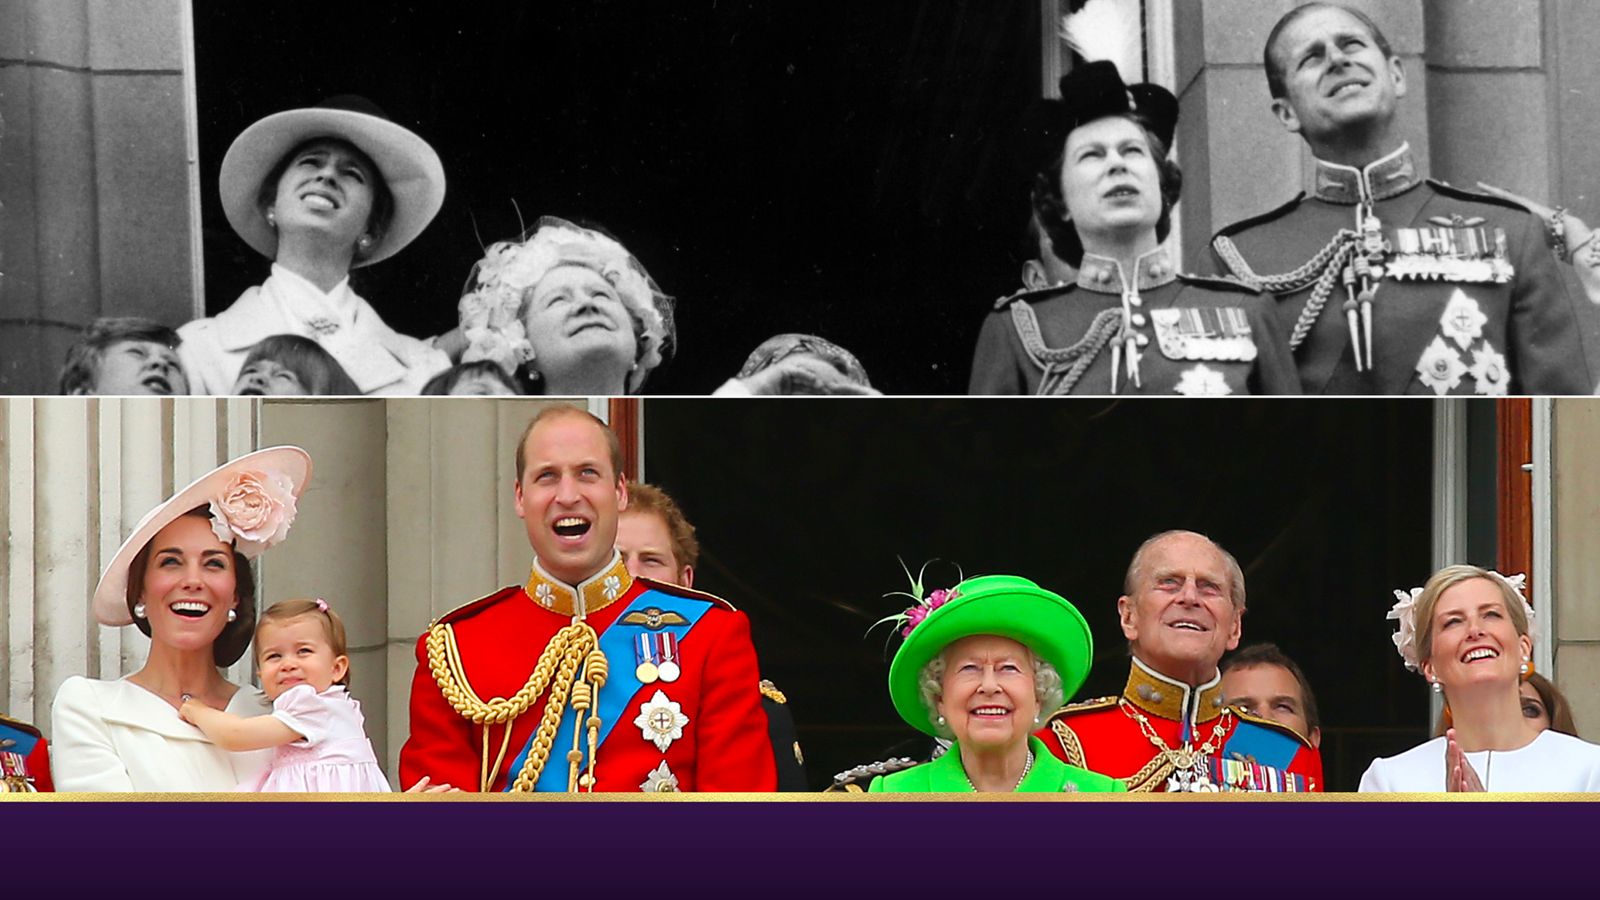 Seven decades of balcony moments celebrating the Queen's 70-year